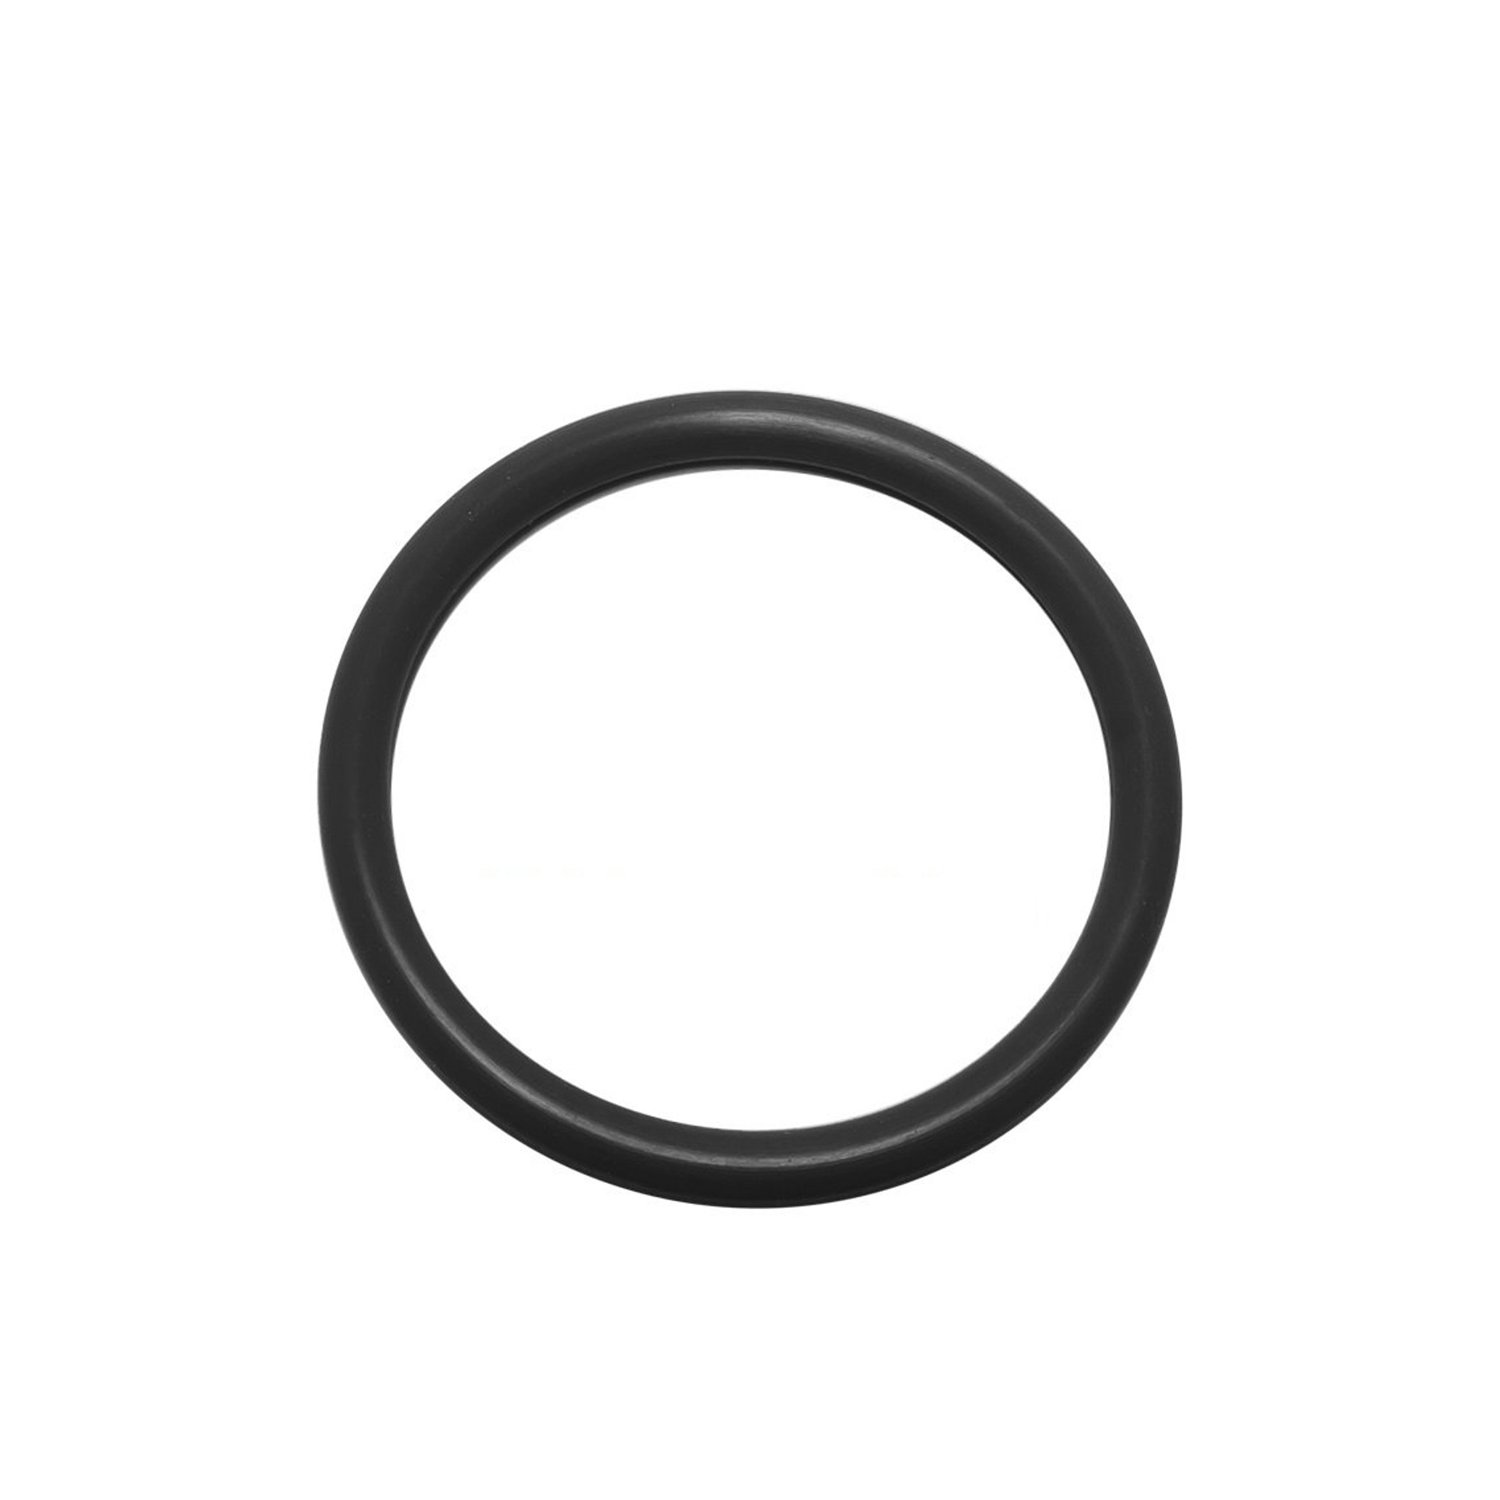 O-ringen 10.82 x 1,78 mm 1 st HNBR-rubber, voor airconditioning R12 & R134A